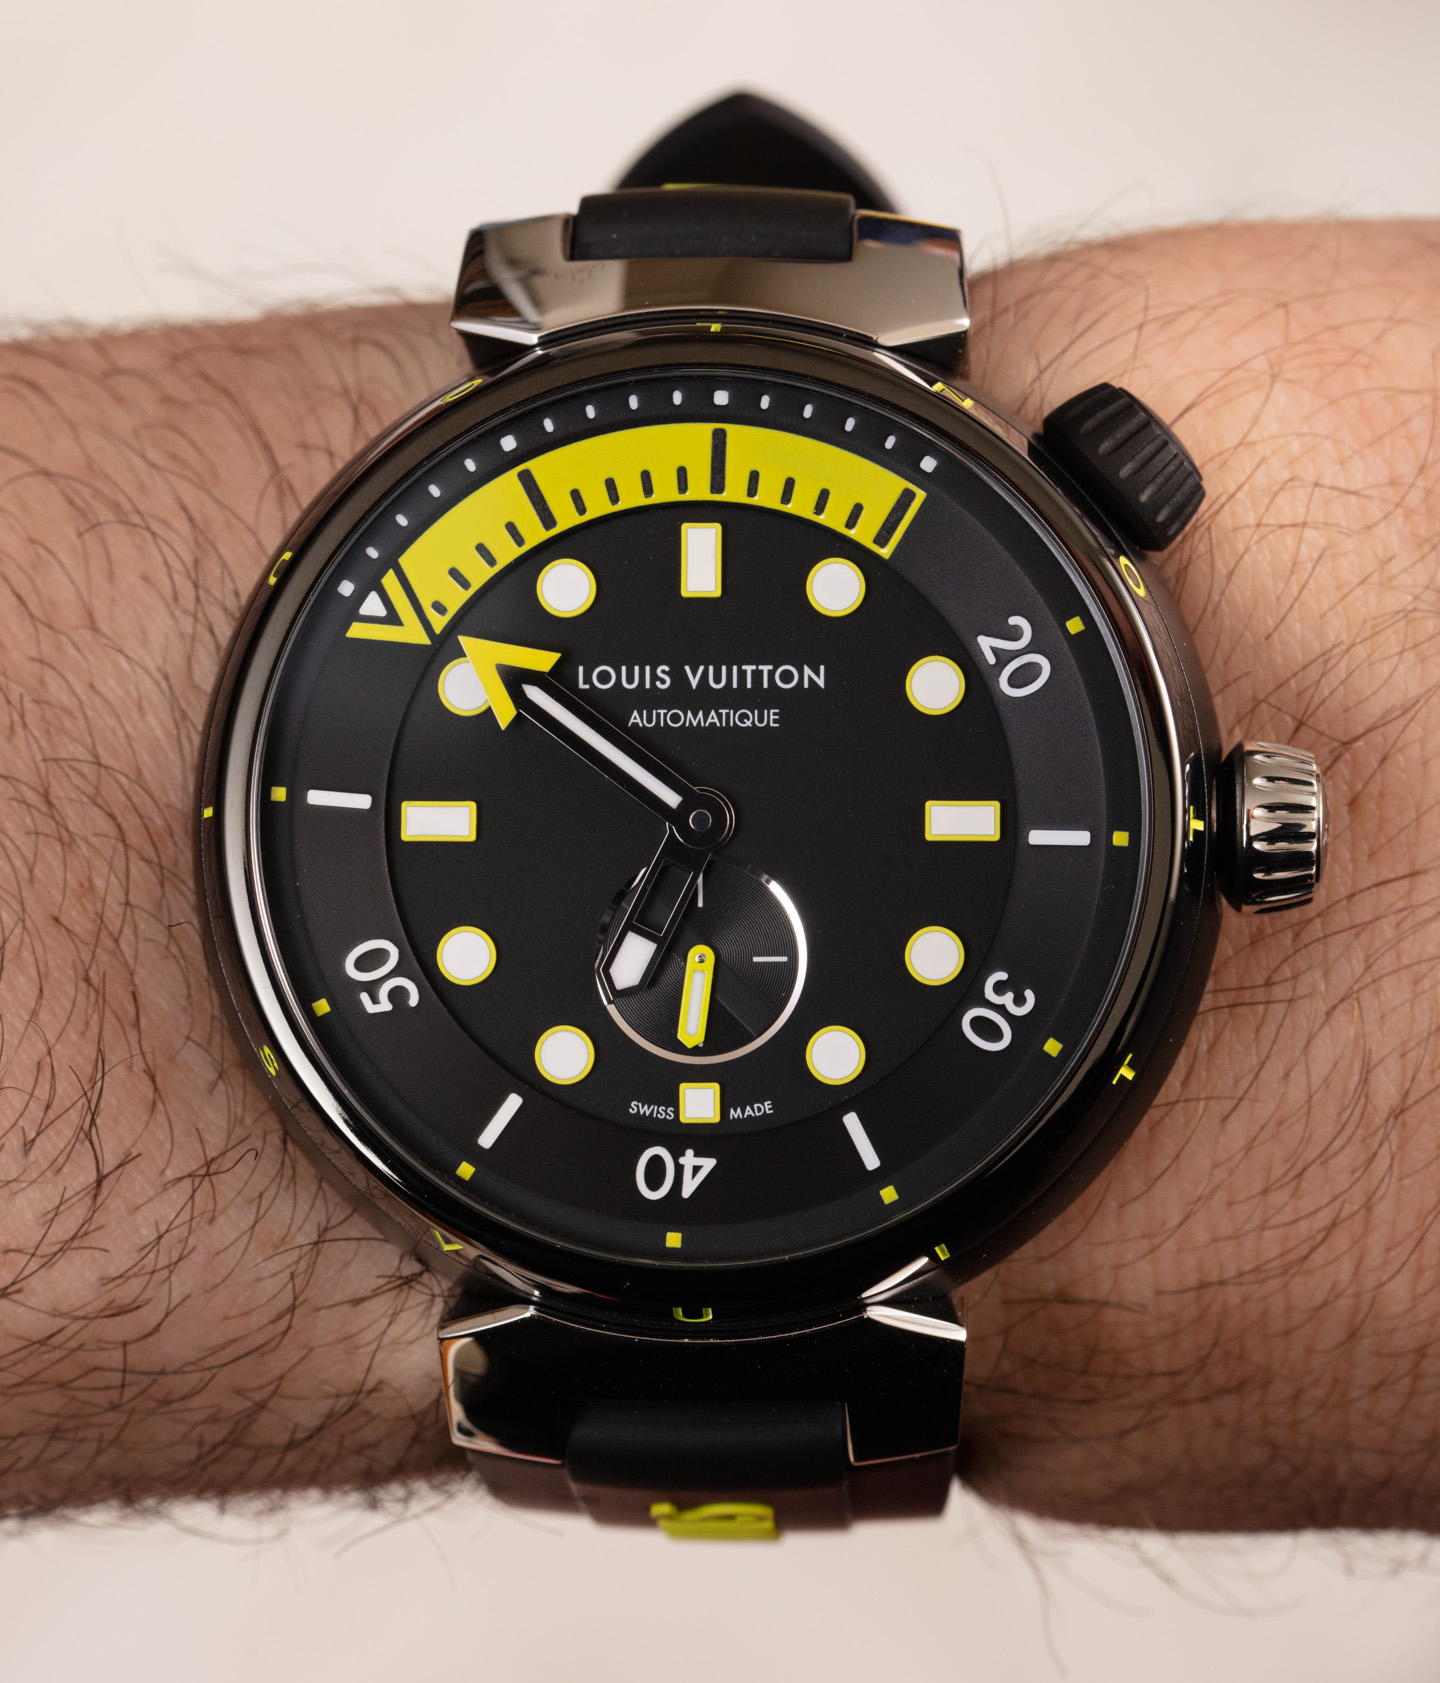 Used Louis Vuitton tambour diver Q10311 watch ($1,252) for sale - Timepeaks